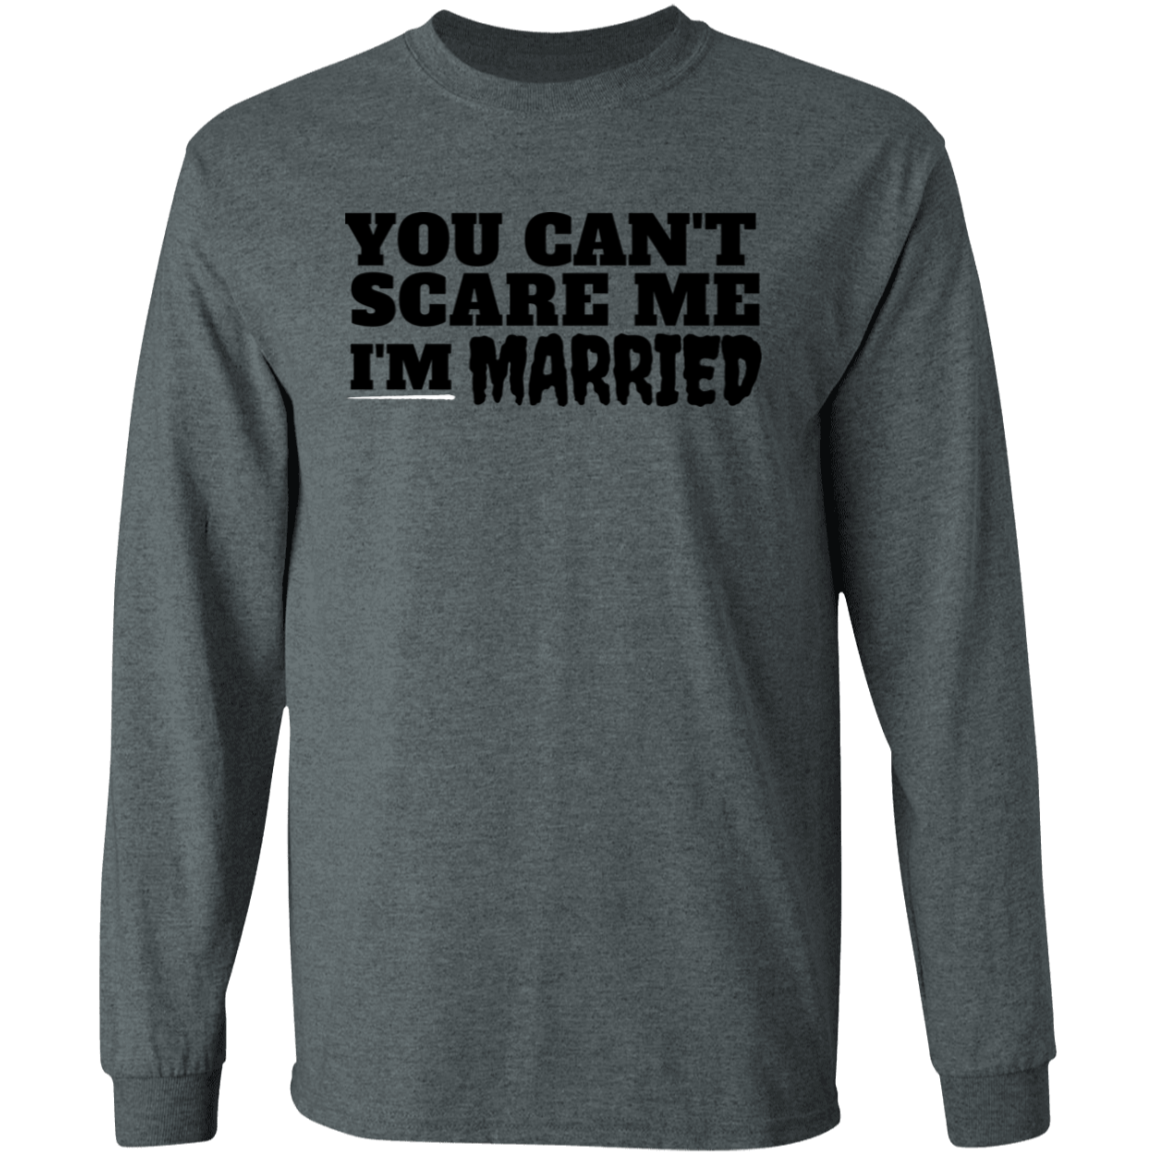 Can't Scare Me | I'm Married (LS T-Shirt)